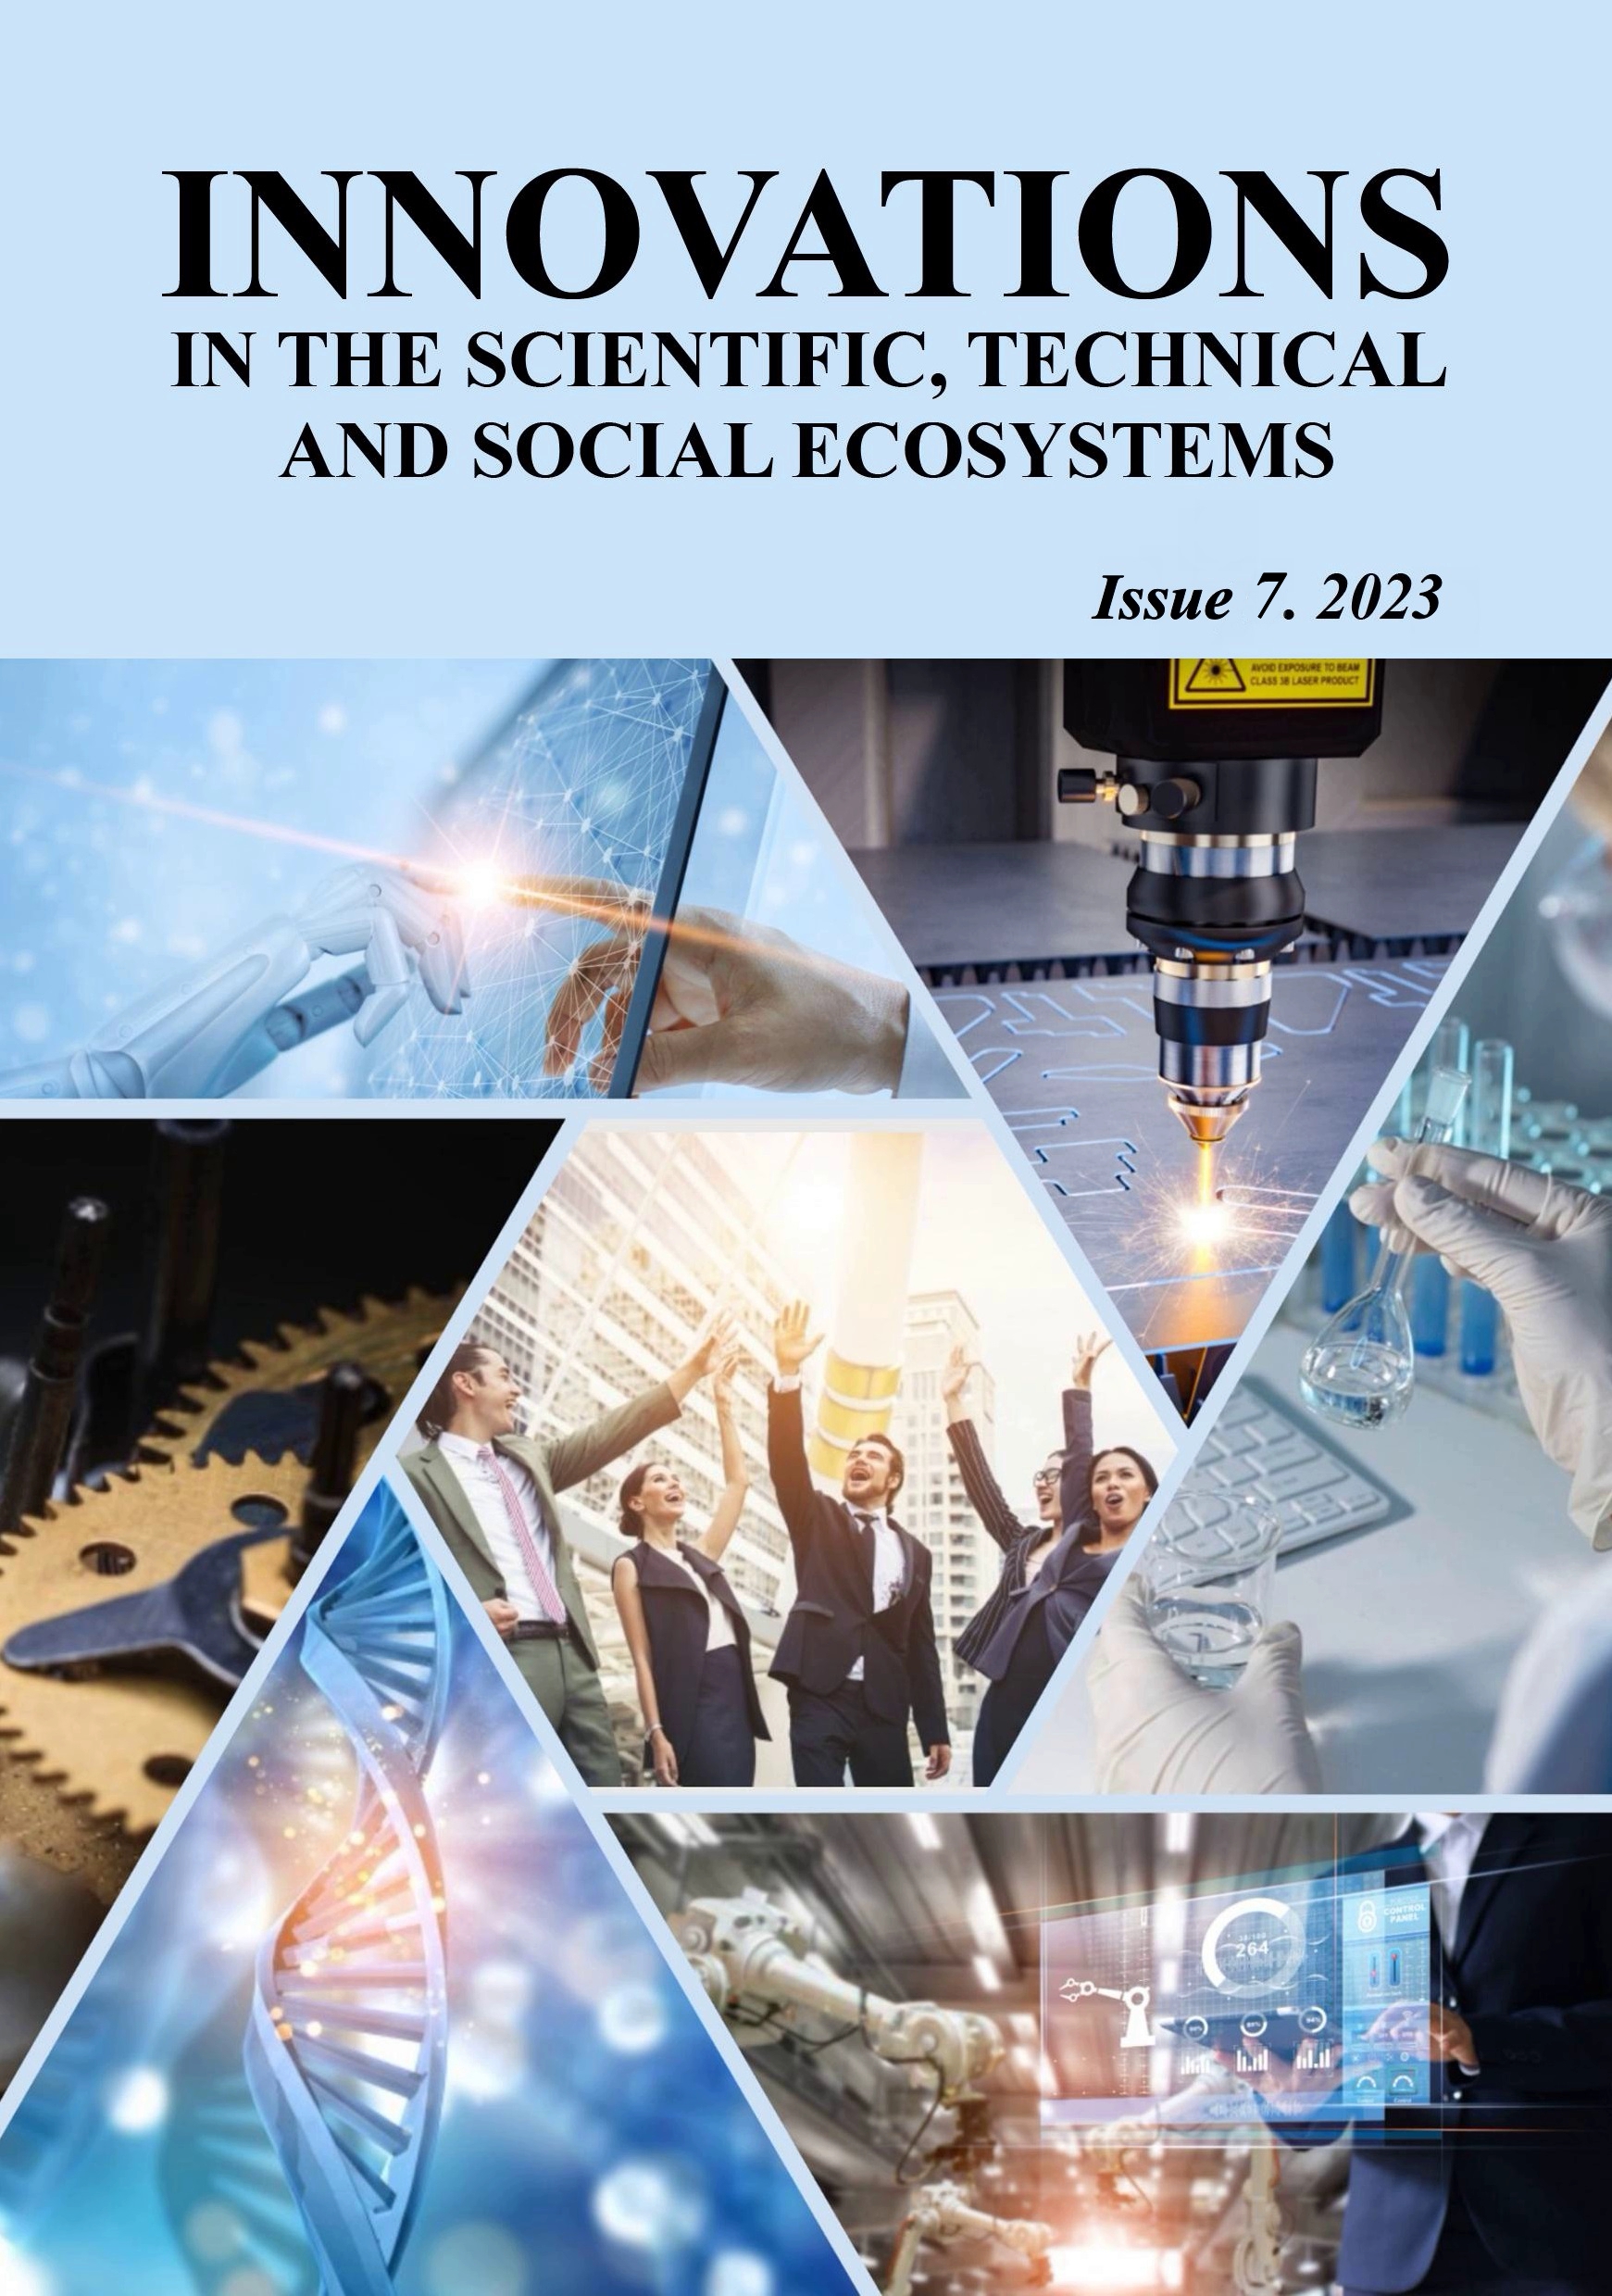 					View Vol. 1 No. 7 (2023): INNOVATIONS IN THE SCIENTIFIC, TECHNICAL AND SOCIAL ECOSYSTEMS
				